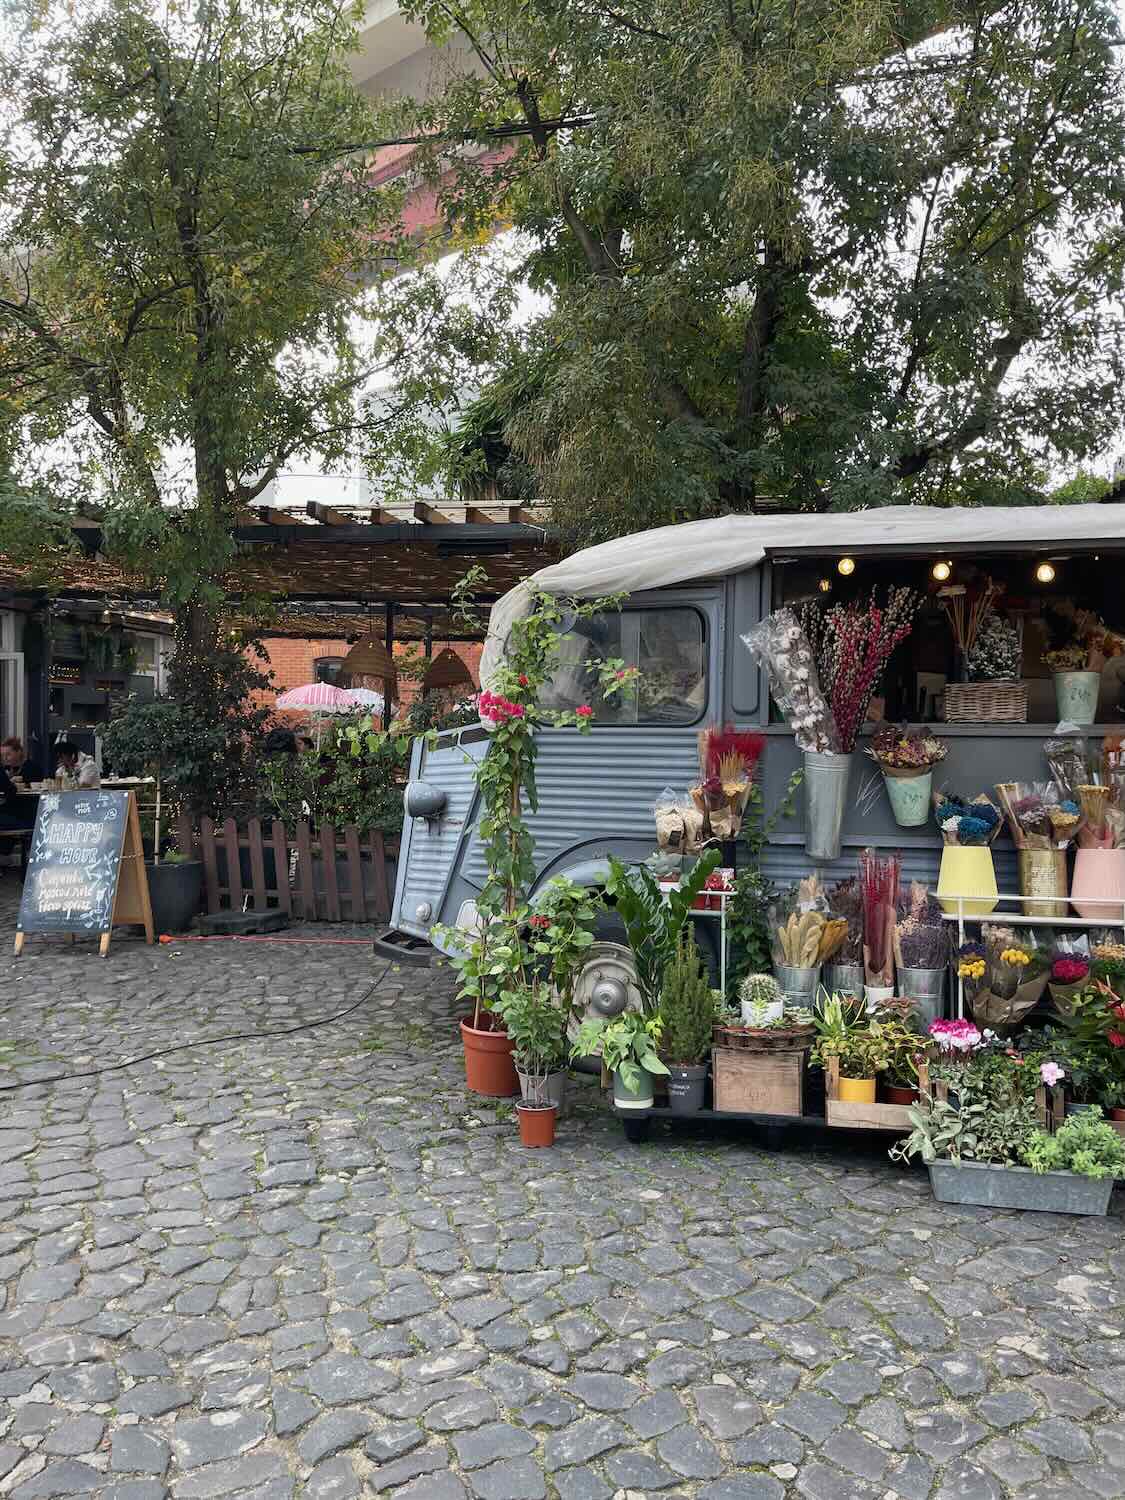 The eclectic LX Factory in Lisbon, with a vintage van repurposed into a charming flower shop, set against a backdrop of creative urban spaces